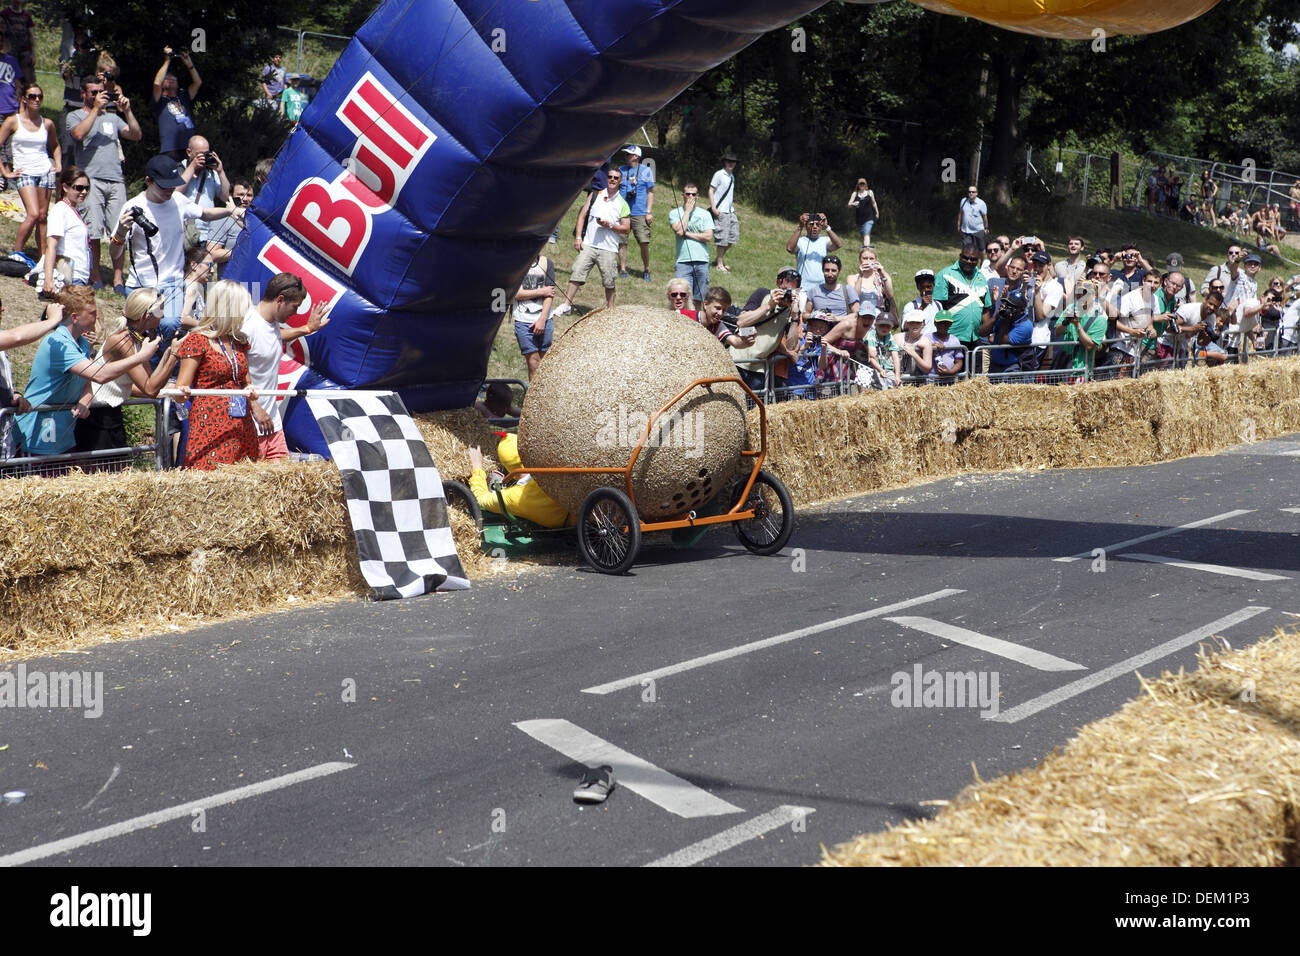 Red Bull Soapbox Race, held at Alexandra Palace in the Summer of 2013, in London, England Stock Photo